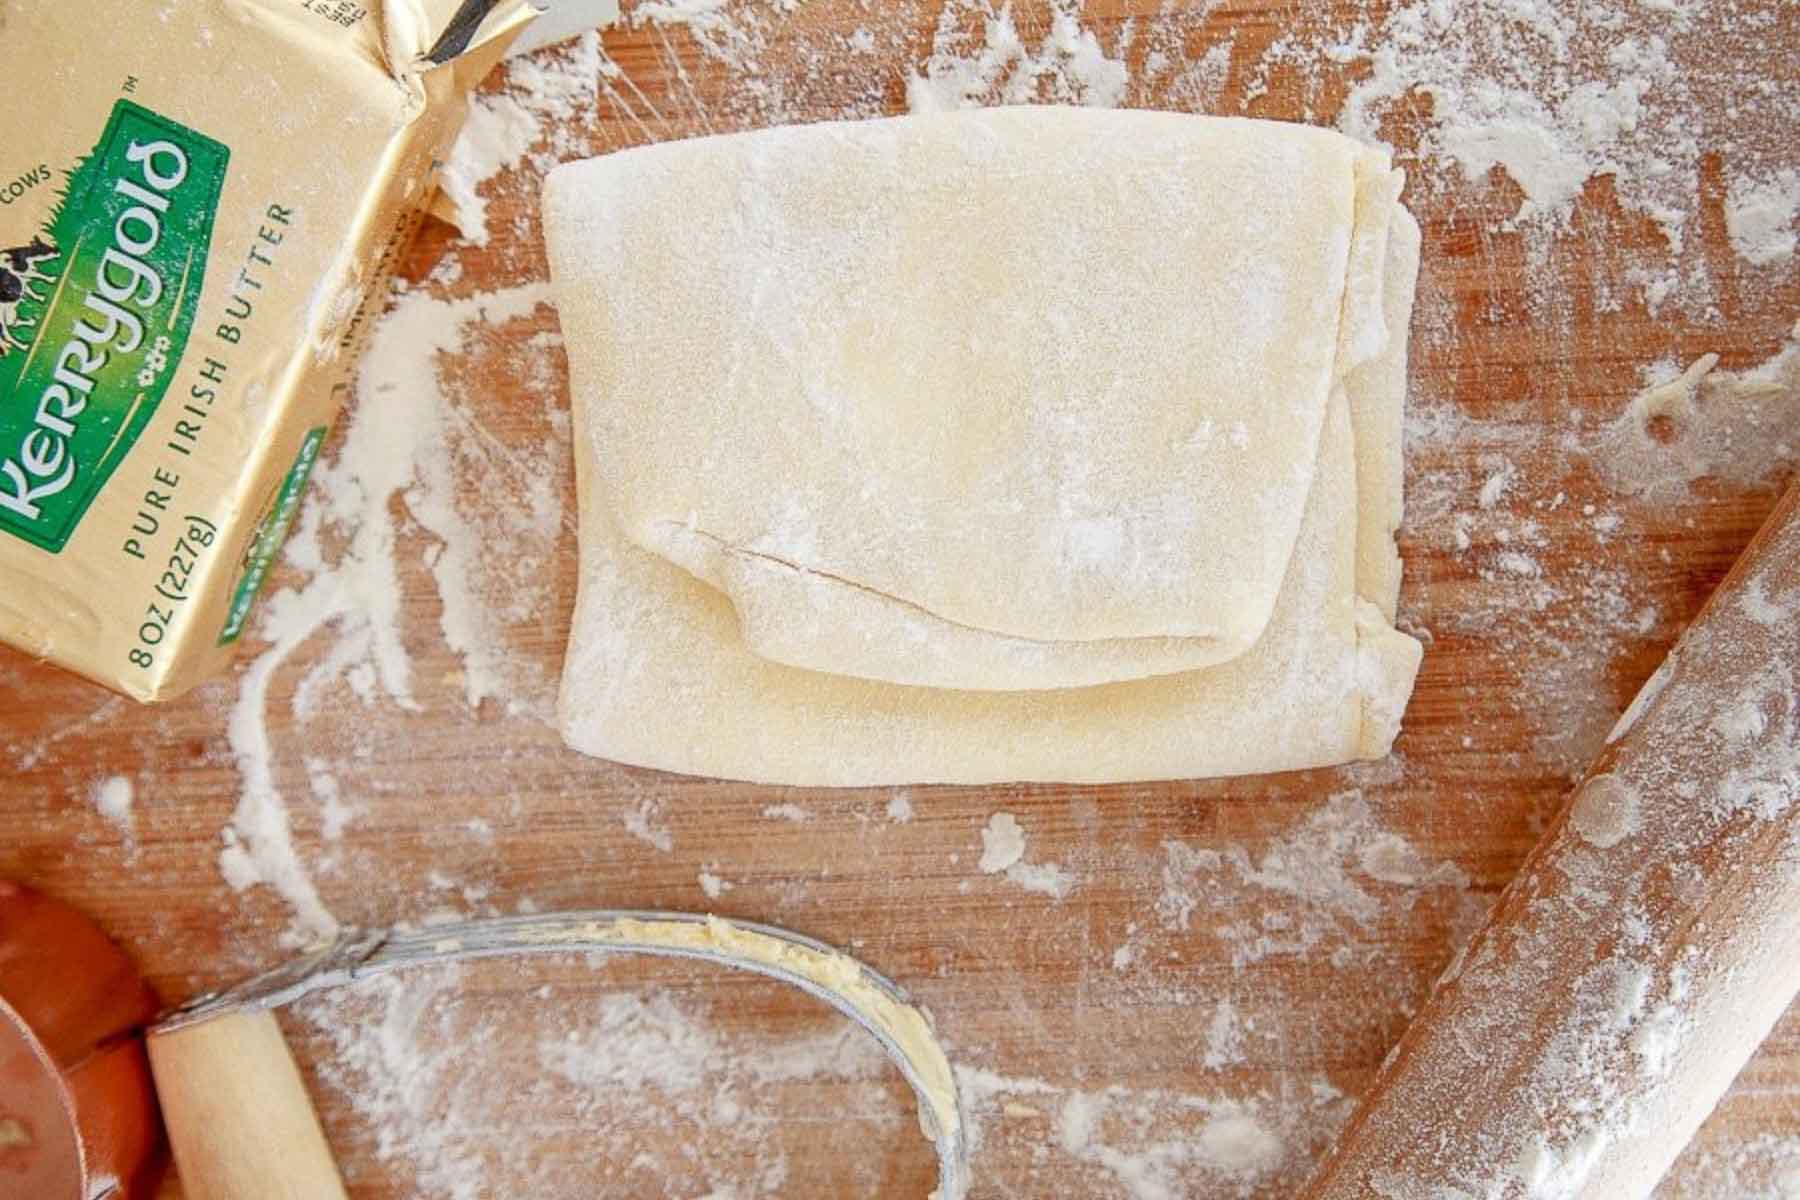 Folded sheet of pastry on wooden cutting board with butter nearby.